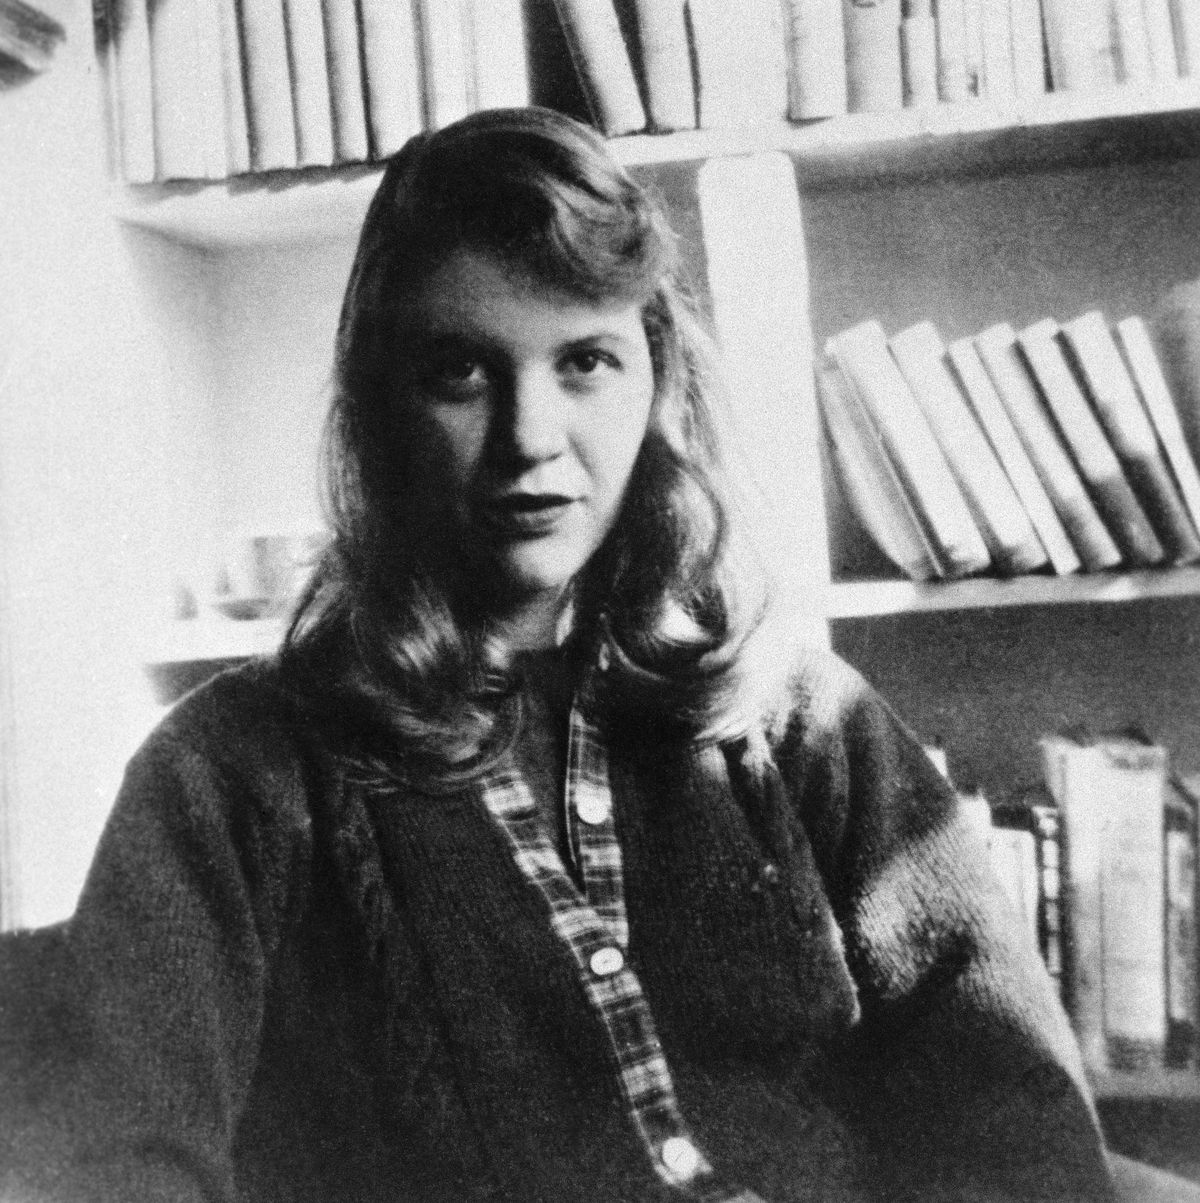 original caption photo shows author sylvia plath seated in front of a bookshelf